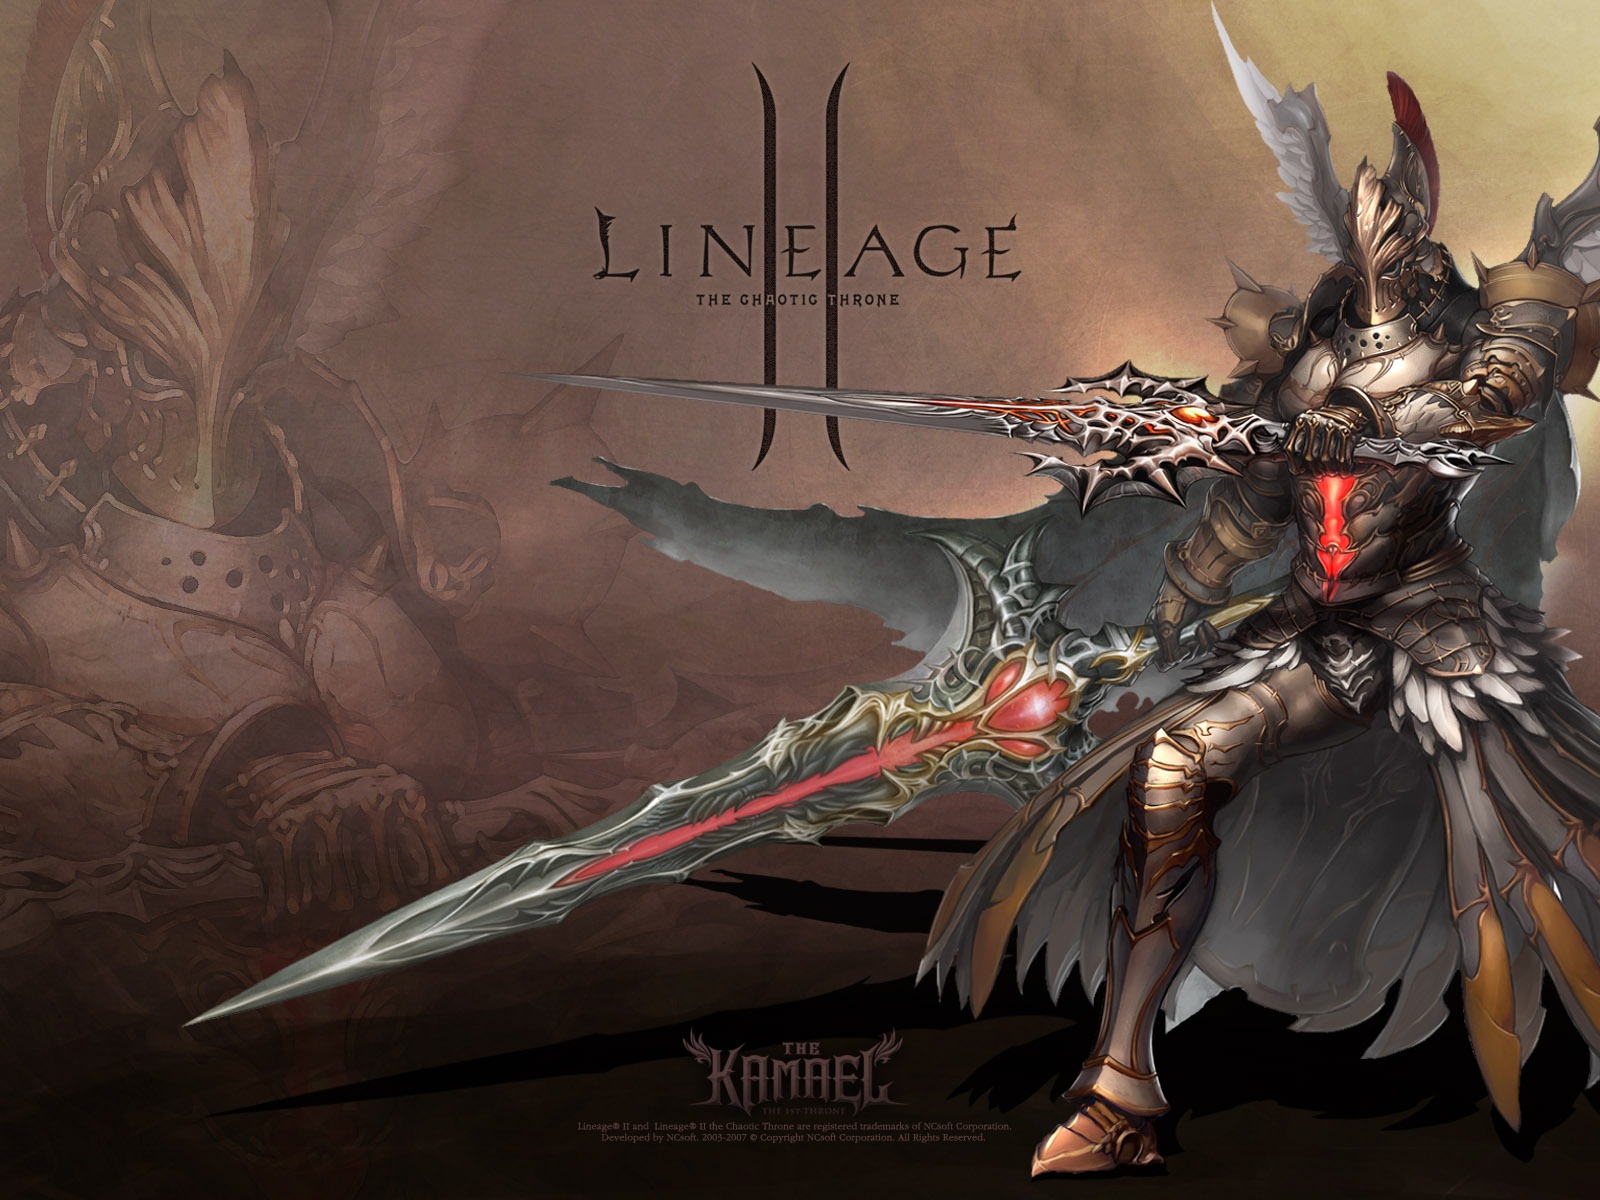 LINEAGE Ⅱ modeling HD gaming wallpapers #9 - 1600x1200